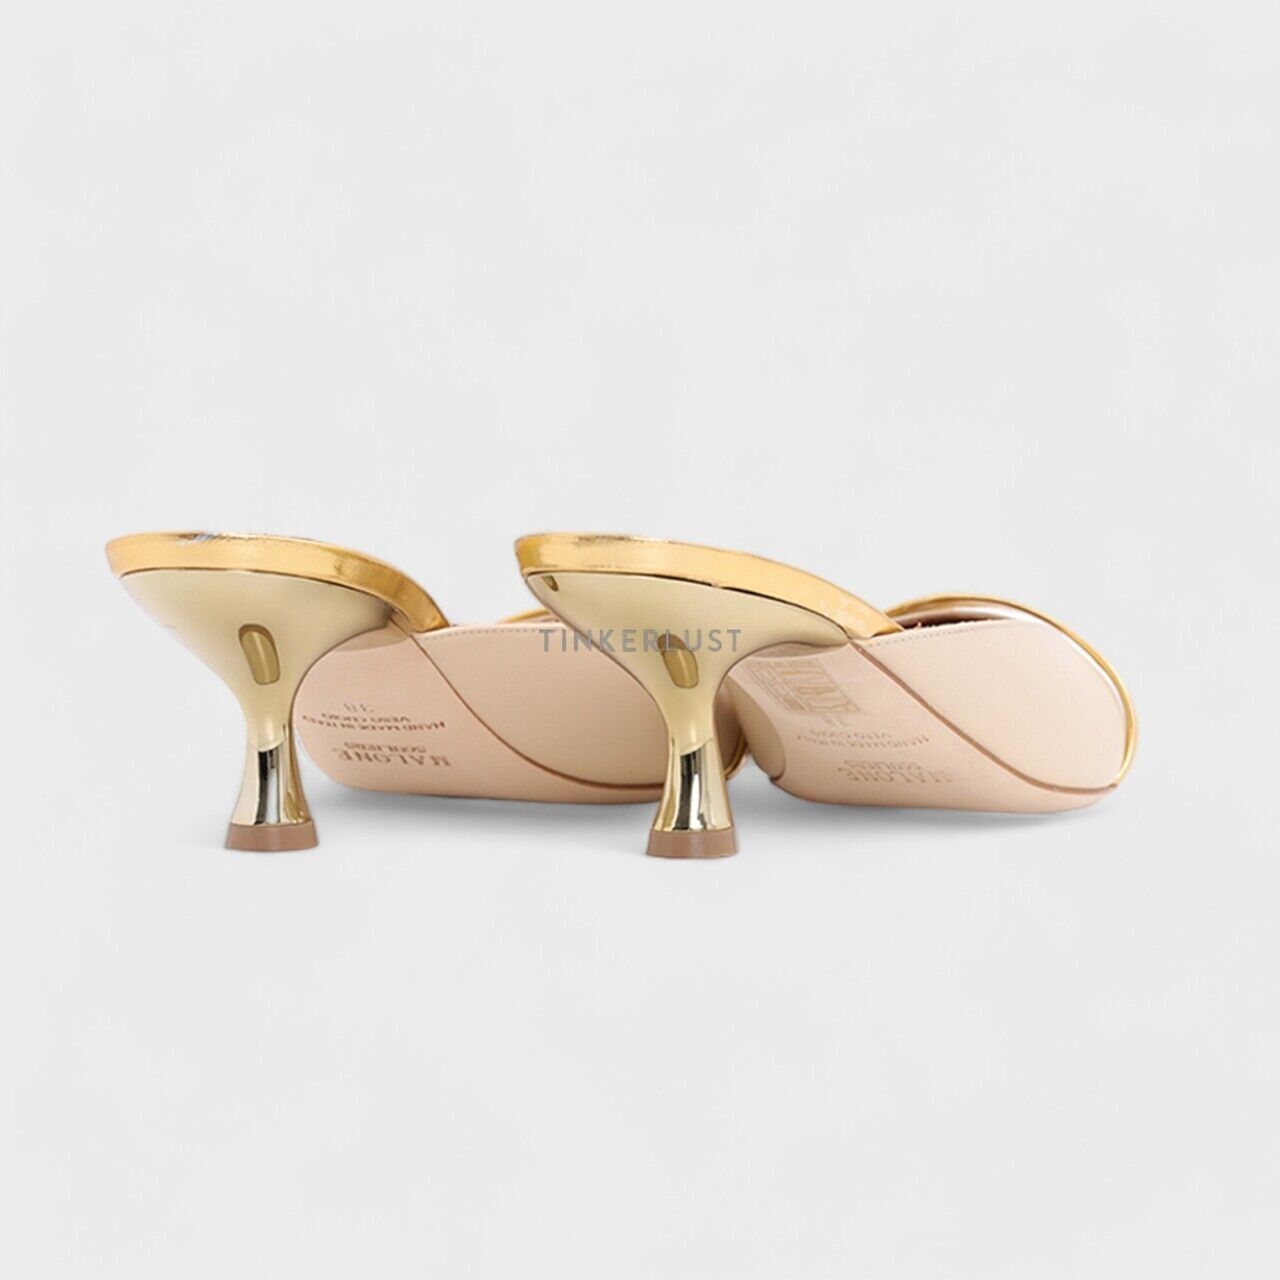 Malone Souliers Keira Mules 45mm Butter Gold Heels